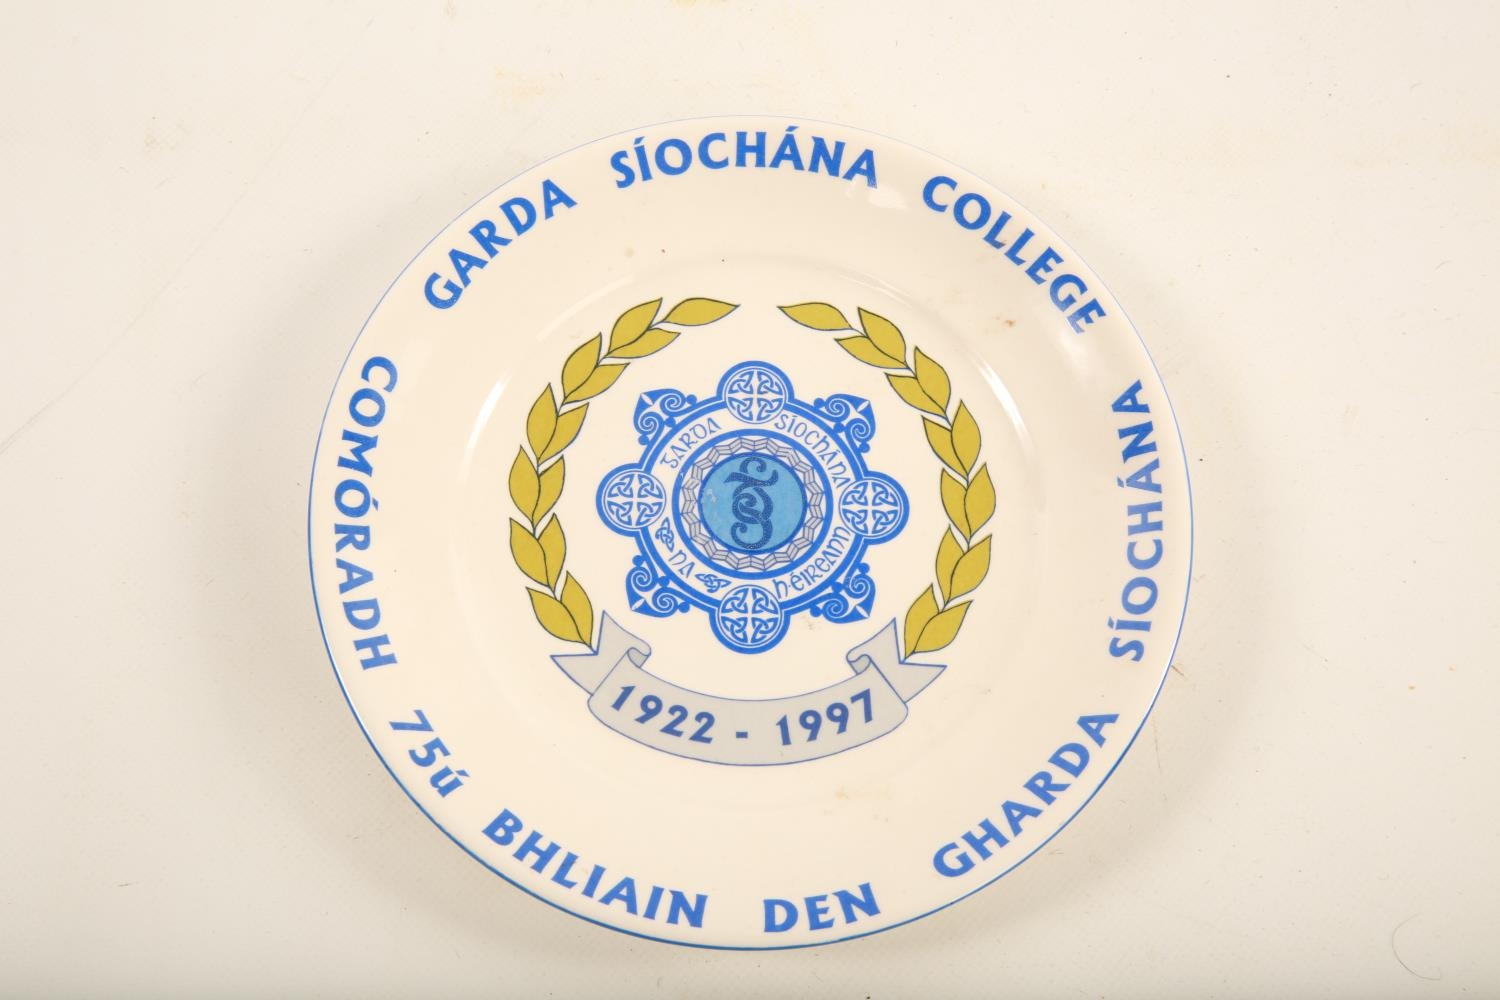 A limited edition Wm. O' Farrell of Arklow presentation plate; presentated to staff at the Garda